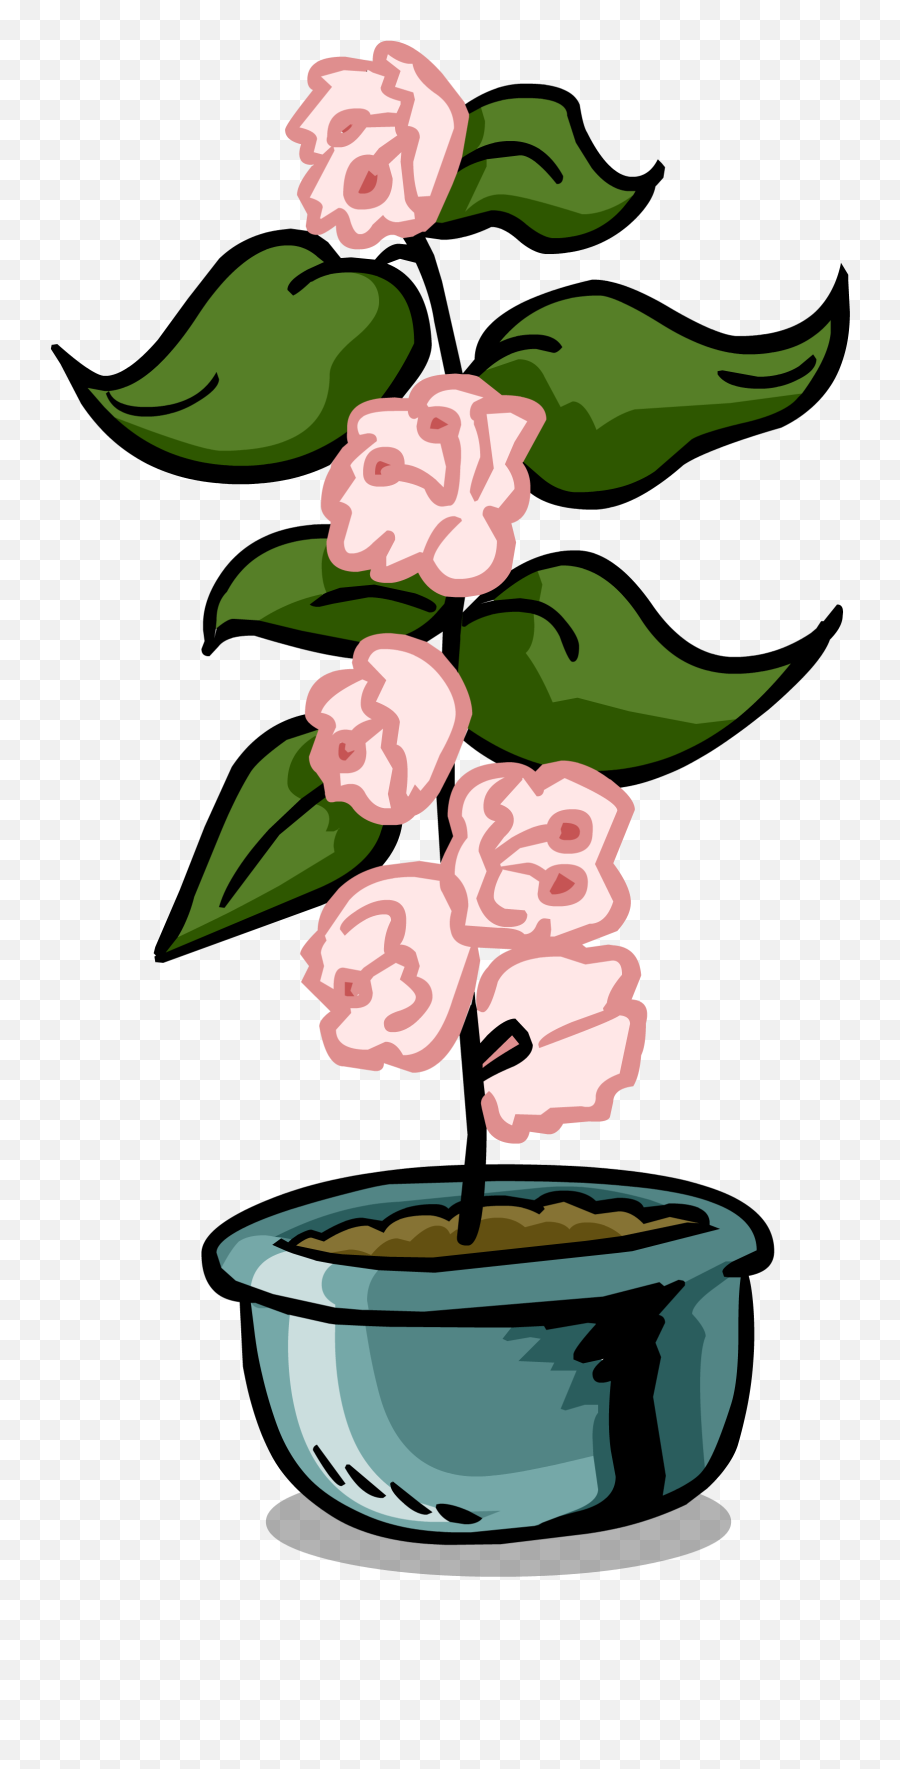 Growing Plants - Club Penguin Potted Plant Png,Growing Plant Png